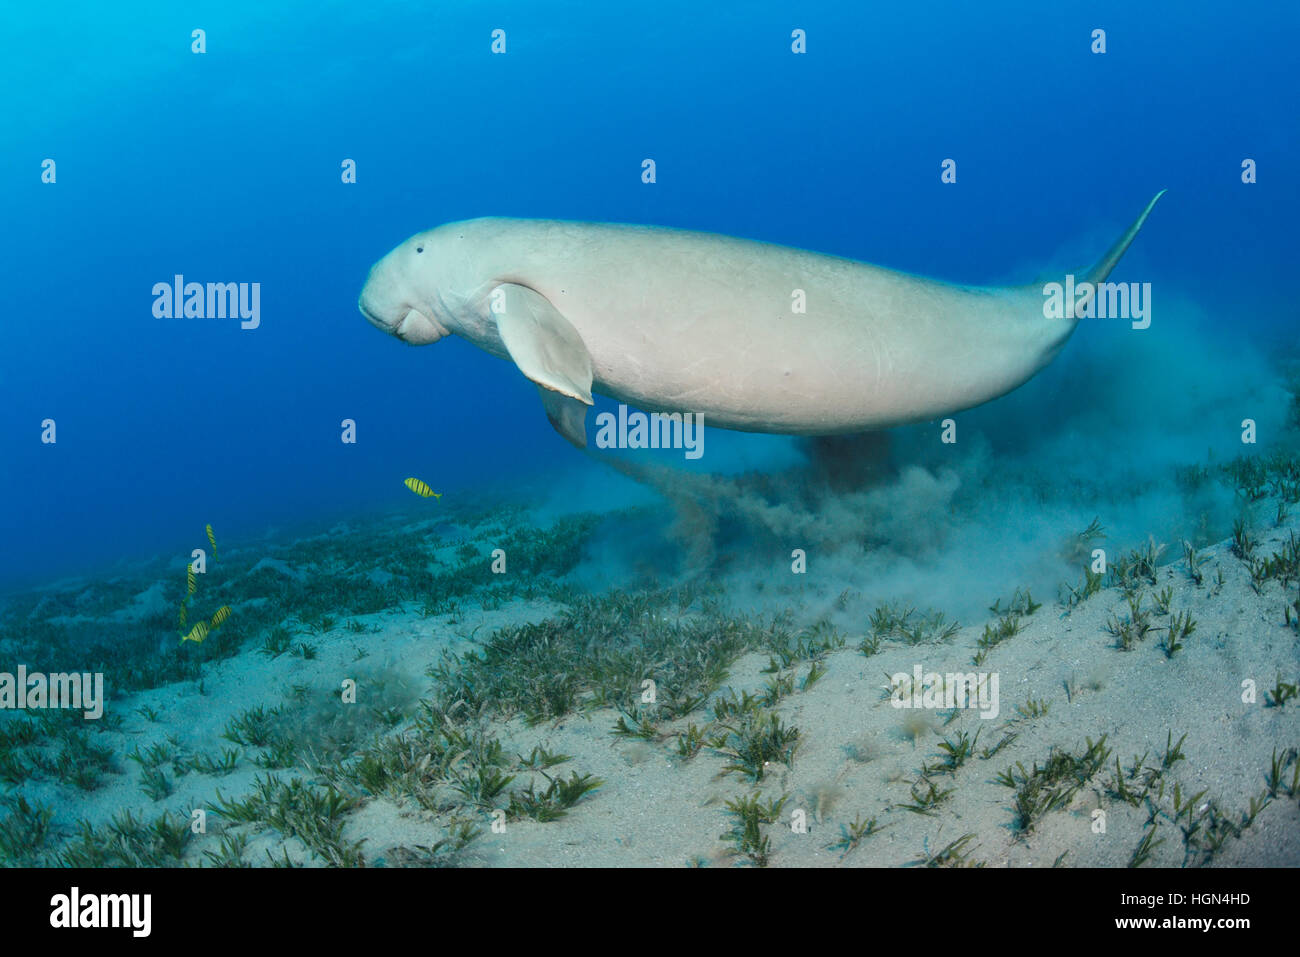 Dugong dugon - a medium-sized marine mammal of the order Sirenia is swimming above the shallow sea grass area in the Red Sea. Stock Photo